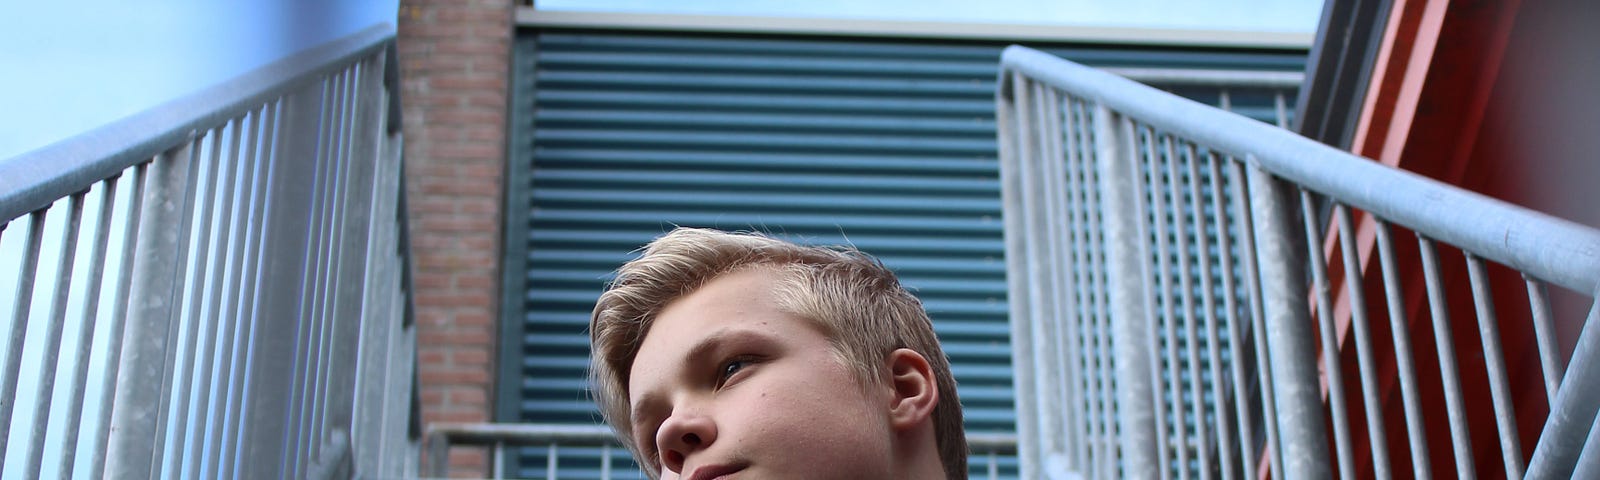 Young blonde boy sitting on concrete stairs.